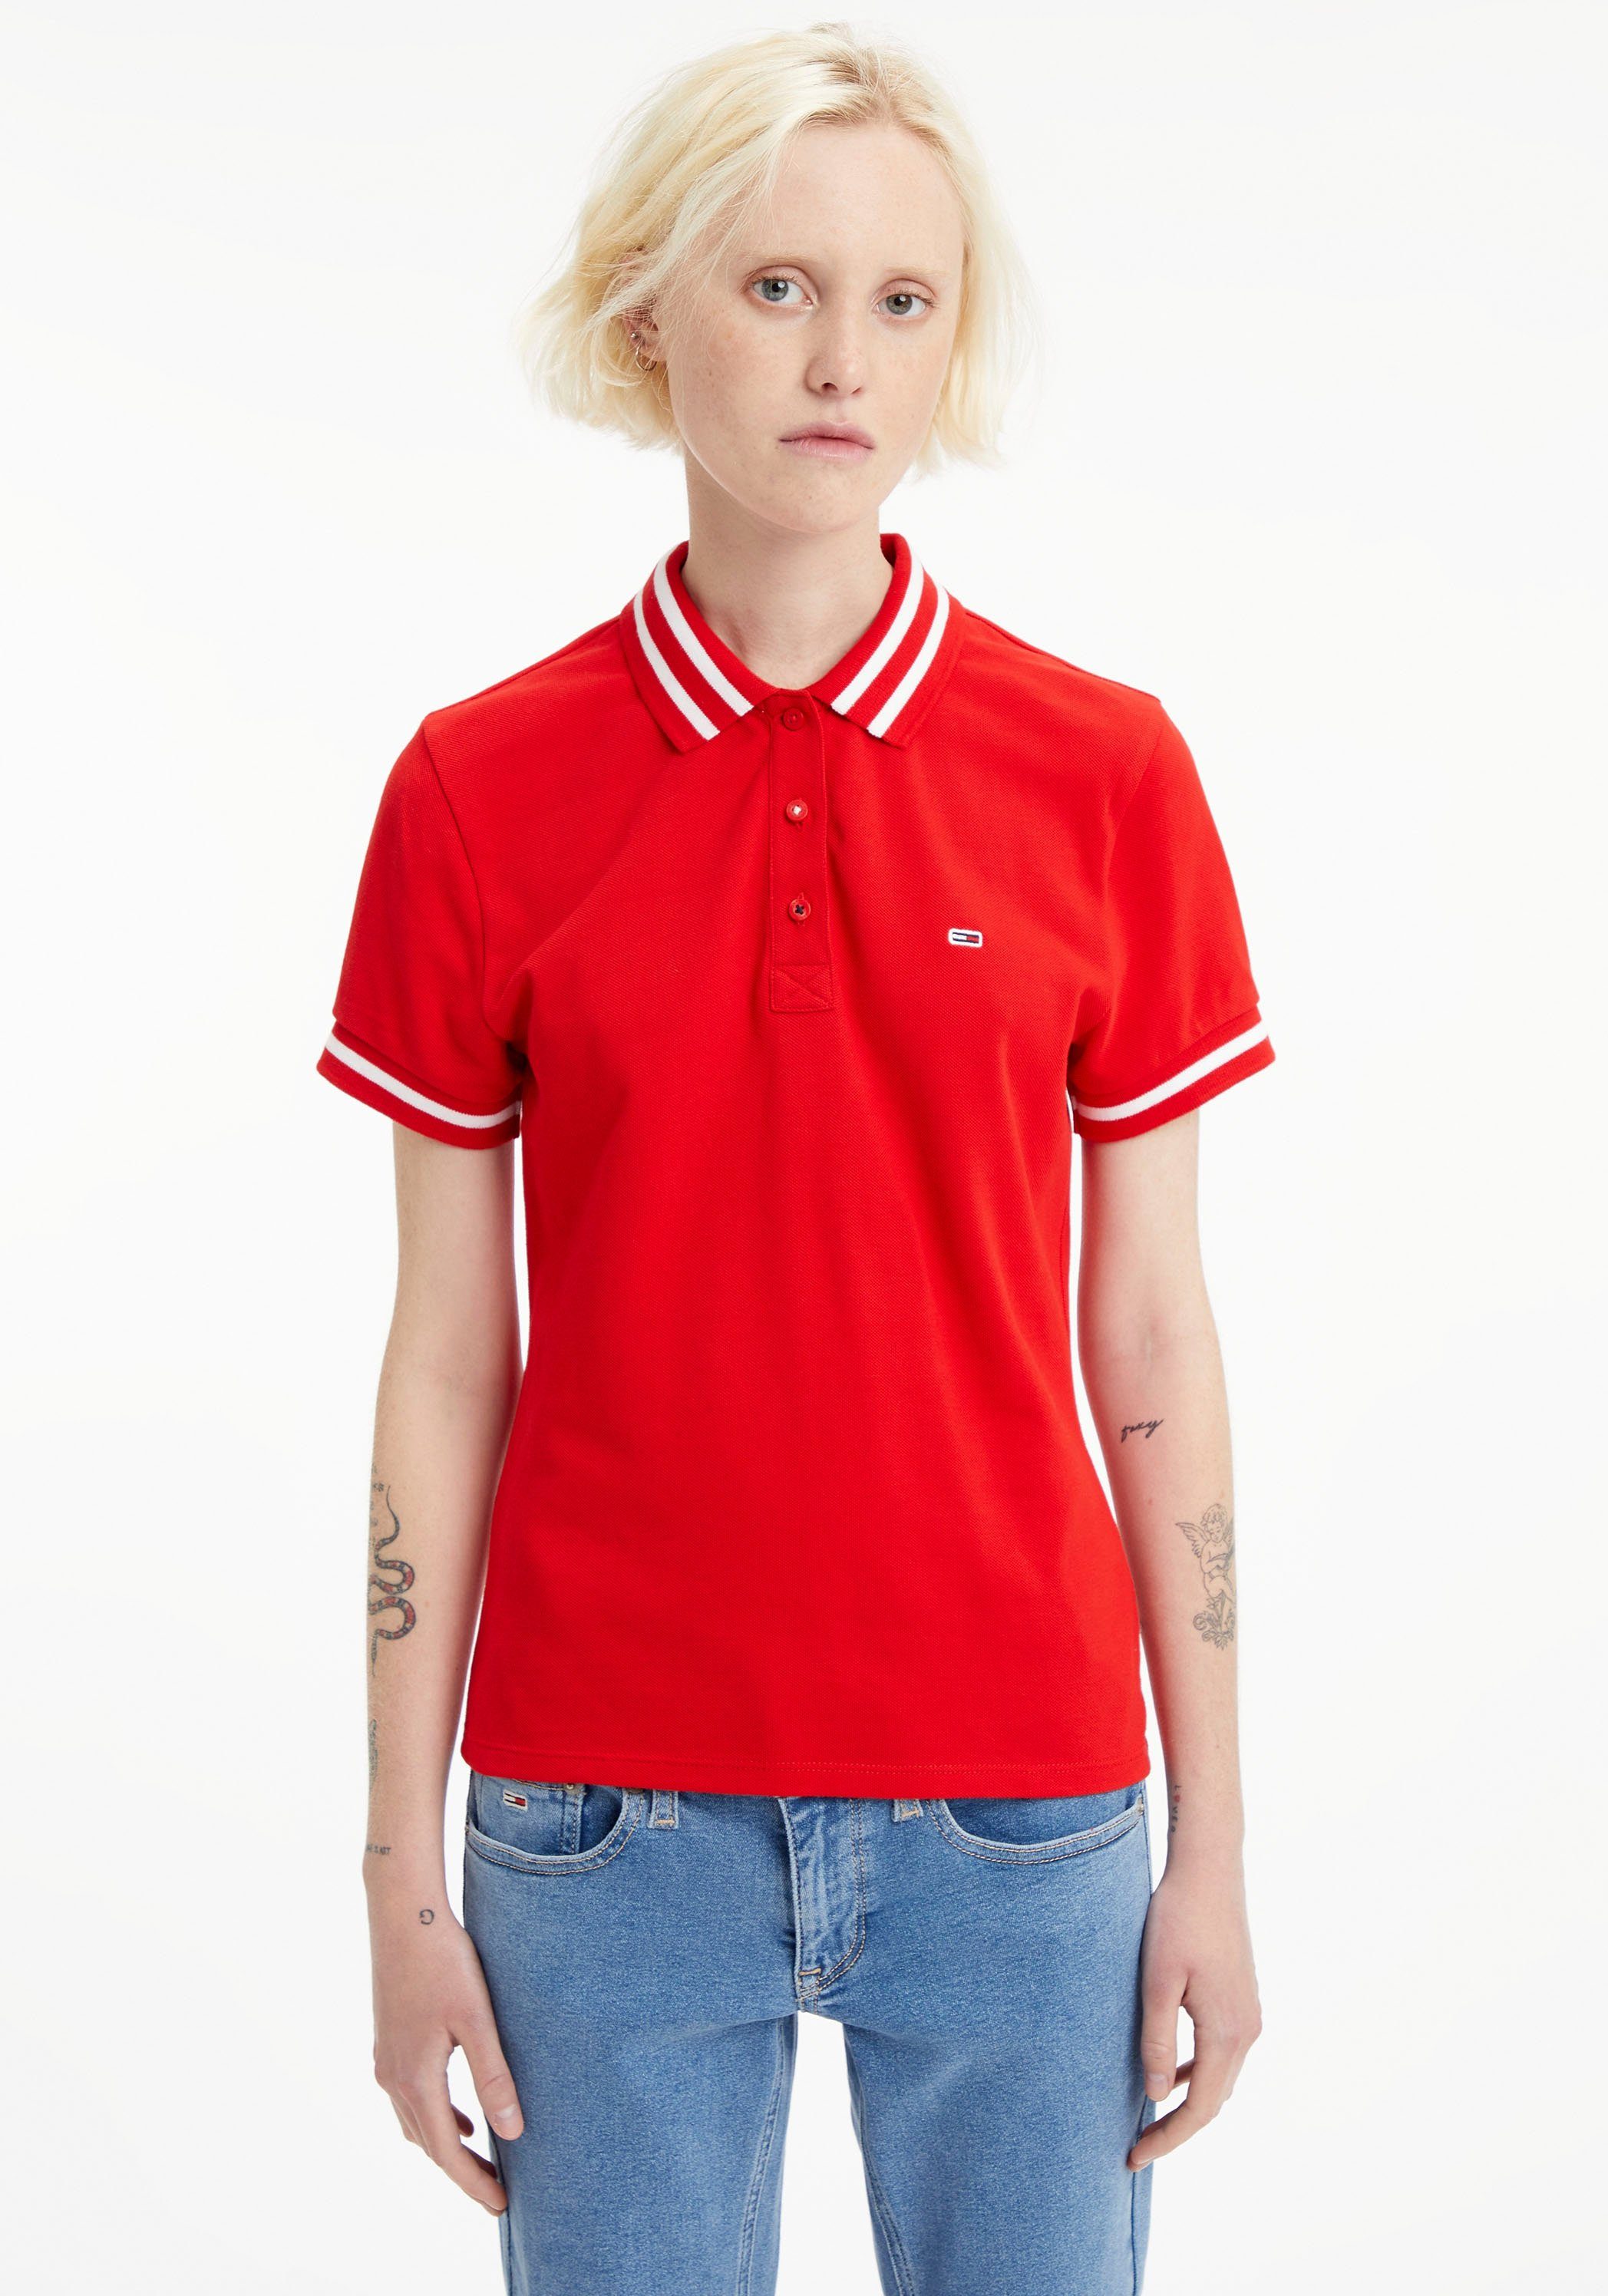 POLO Label-Flag Jeans Tommy Tommy Kontraststreifen & TJW ESSENTIAL mit Poloshirt Jeans TIPPING